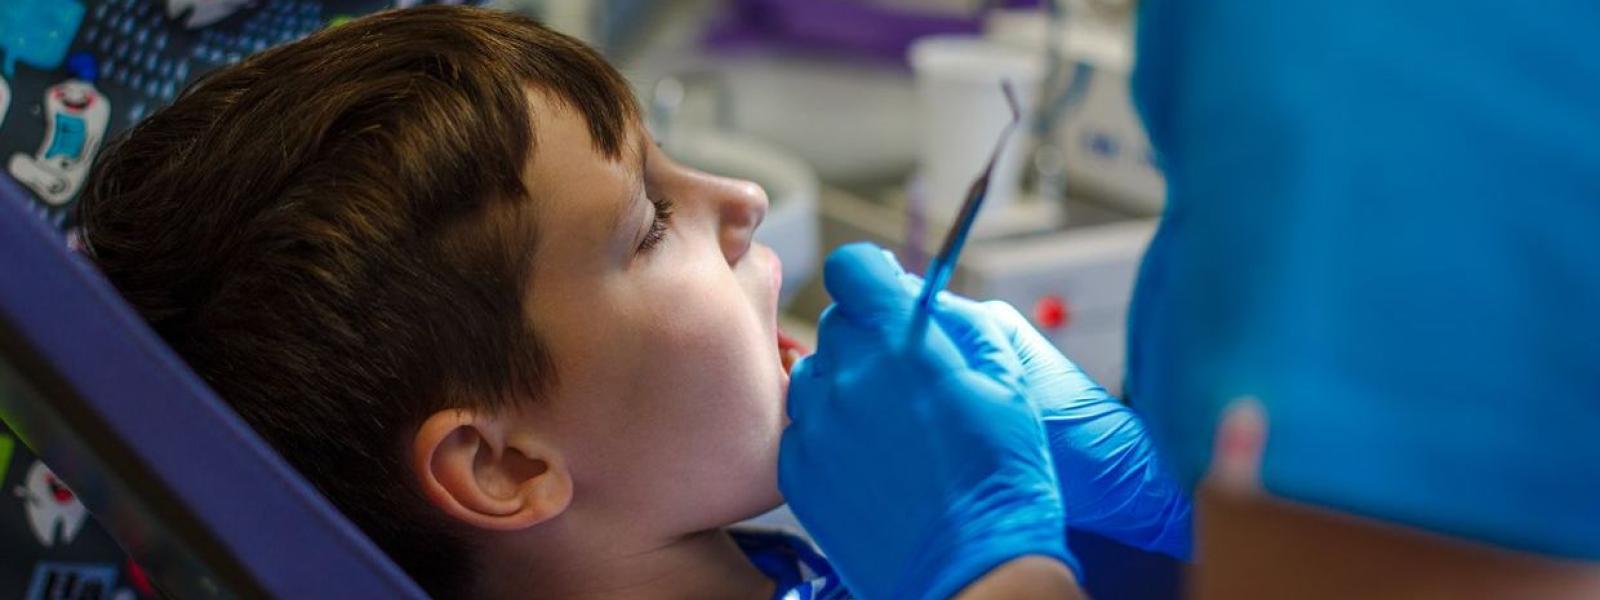 Doctor checking inside boy's mouth 